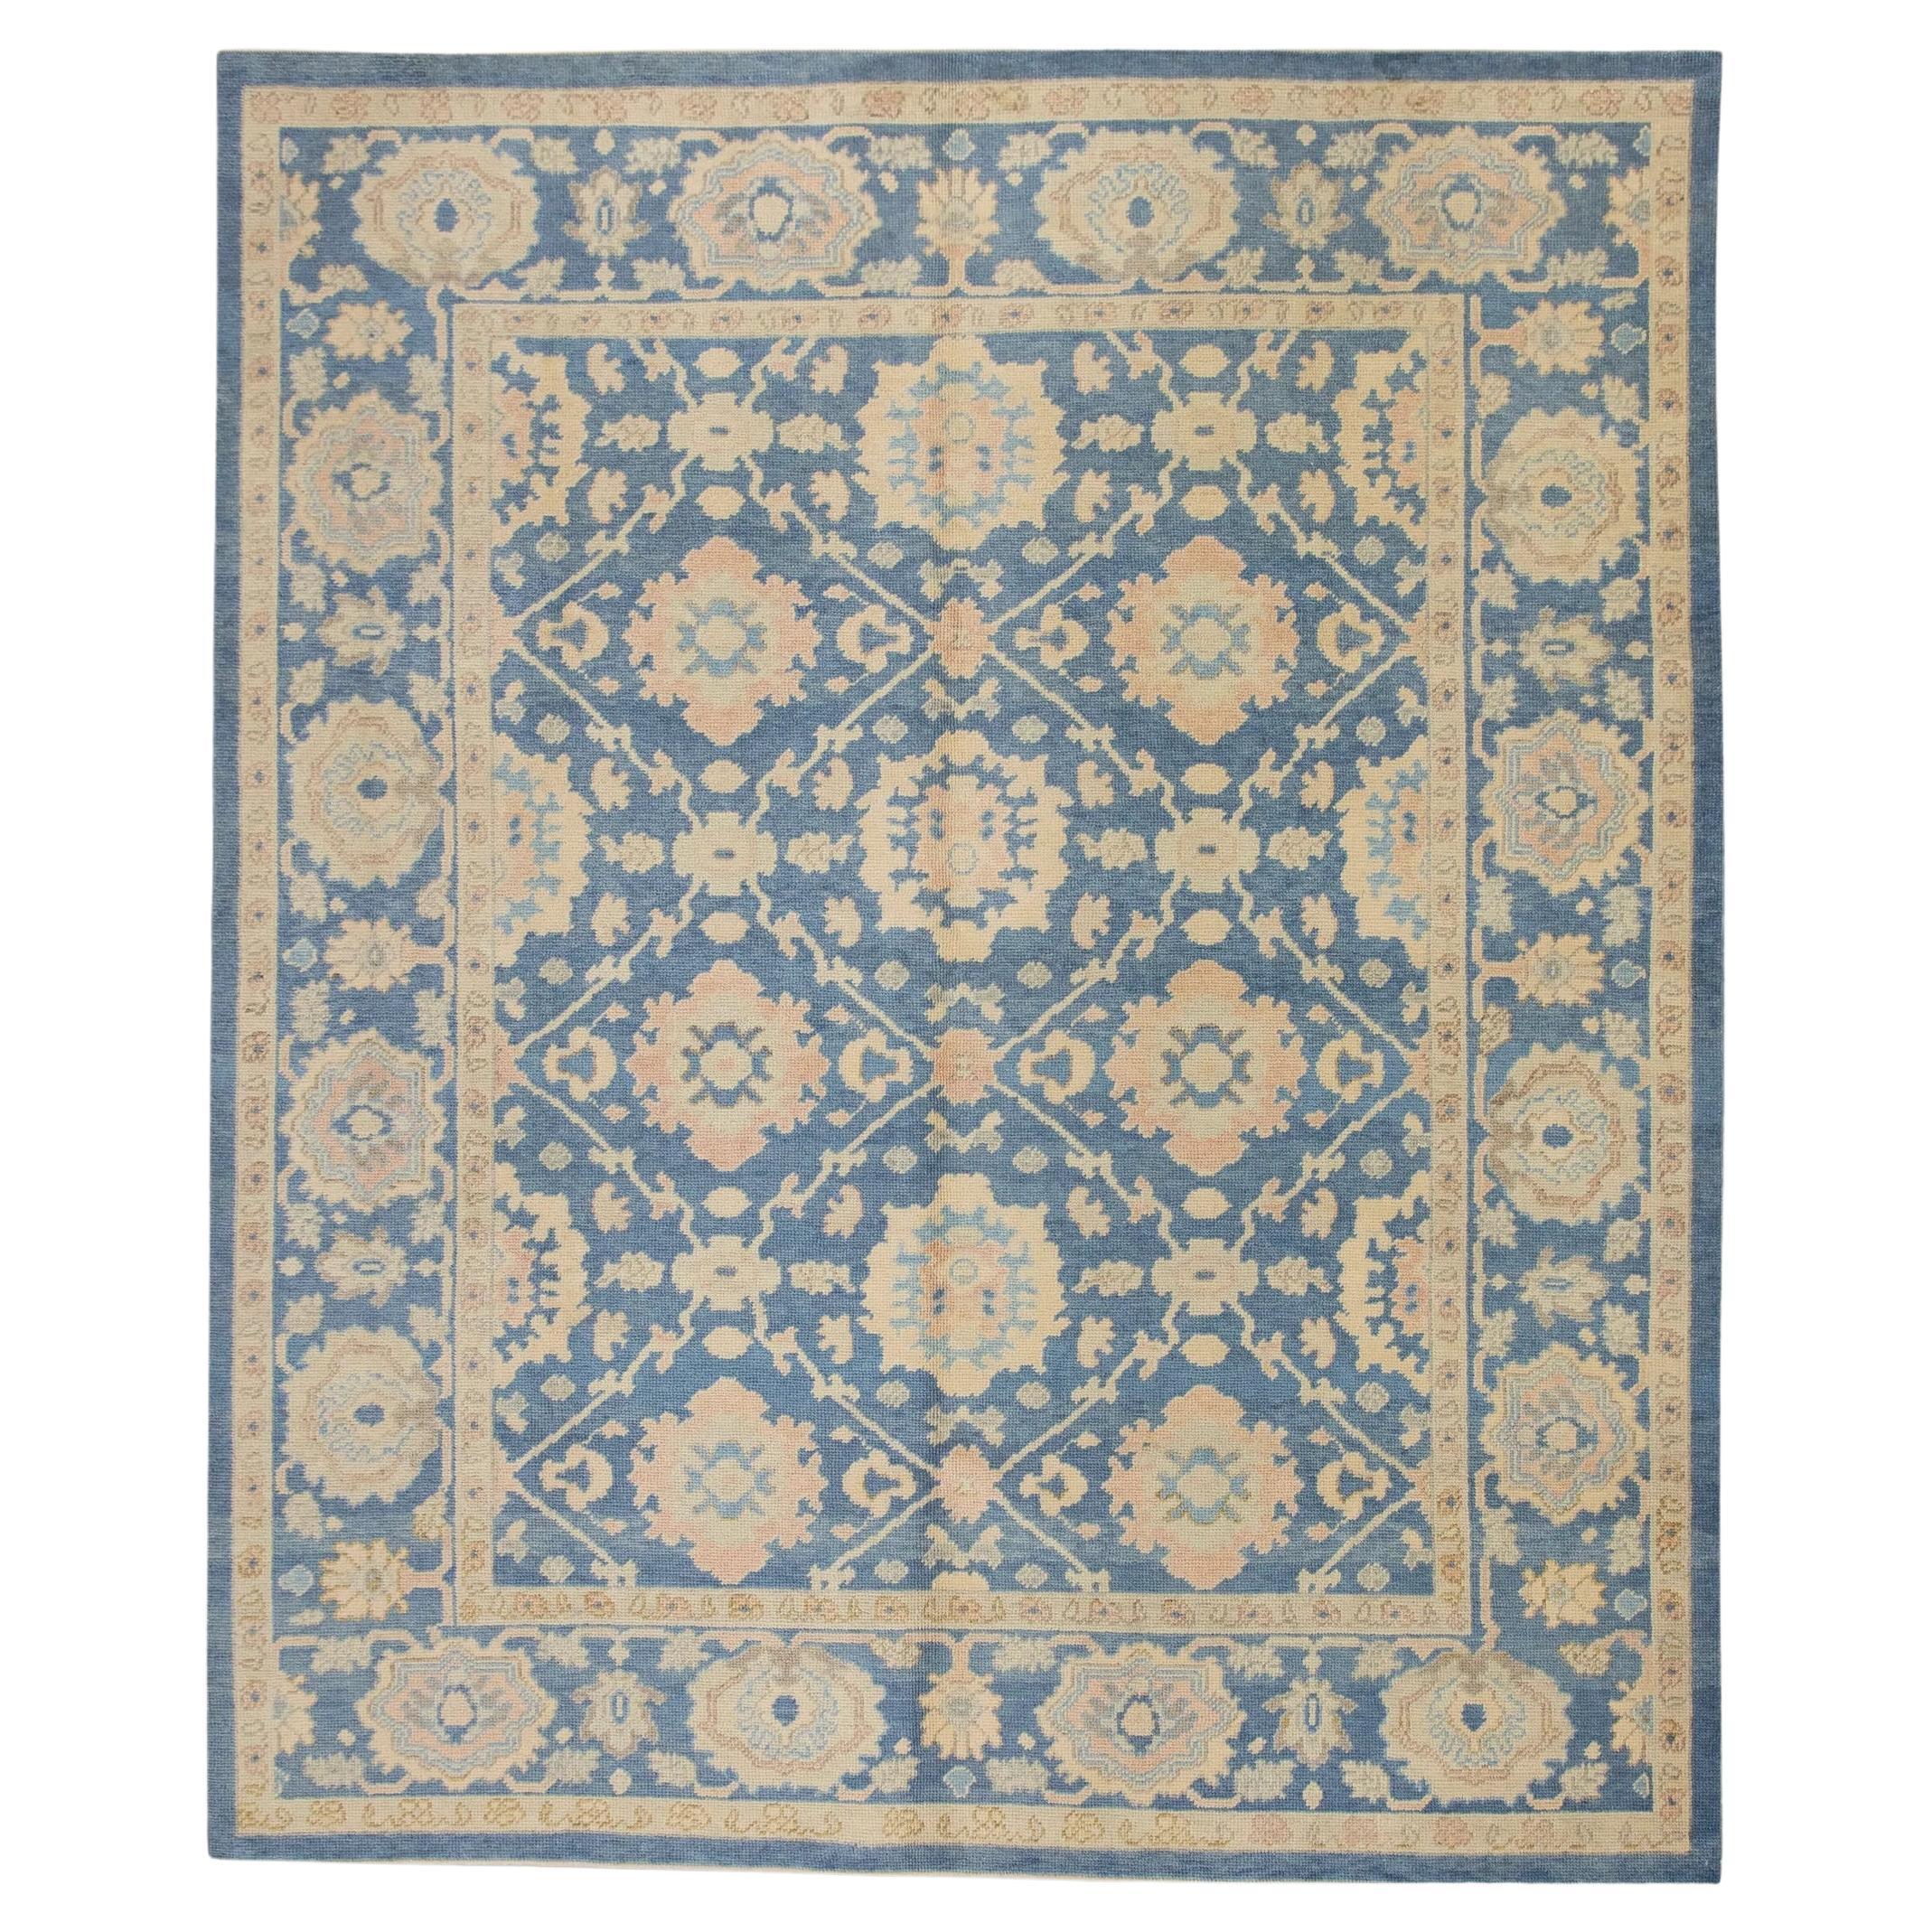 Blue & Pink Handwoven Wool Turkish Oushak Rug in Floral Pattern 8'1" x 10'2"